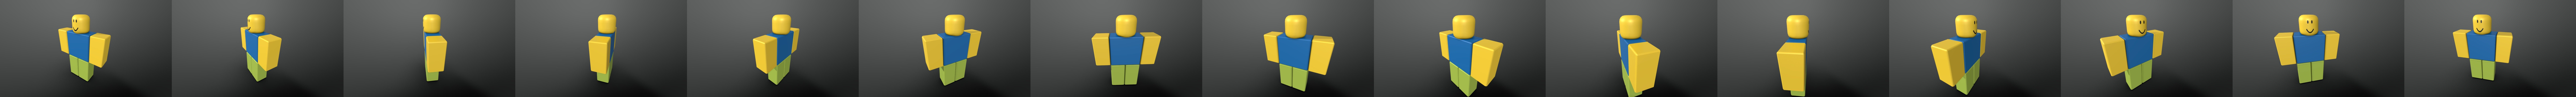 Noob Roblox - Rigged - Game asset free VR / AR / low-poly 3D model rigged